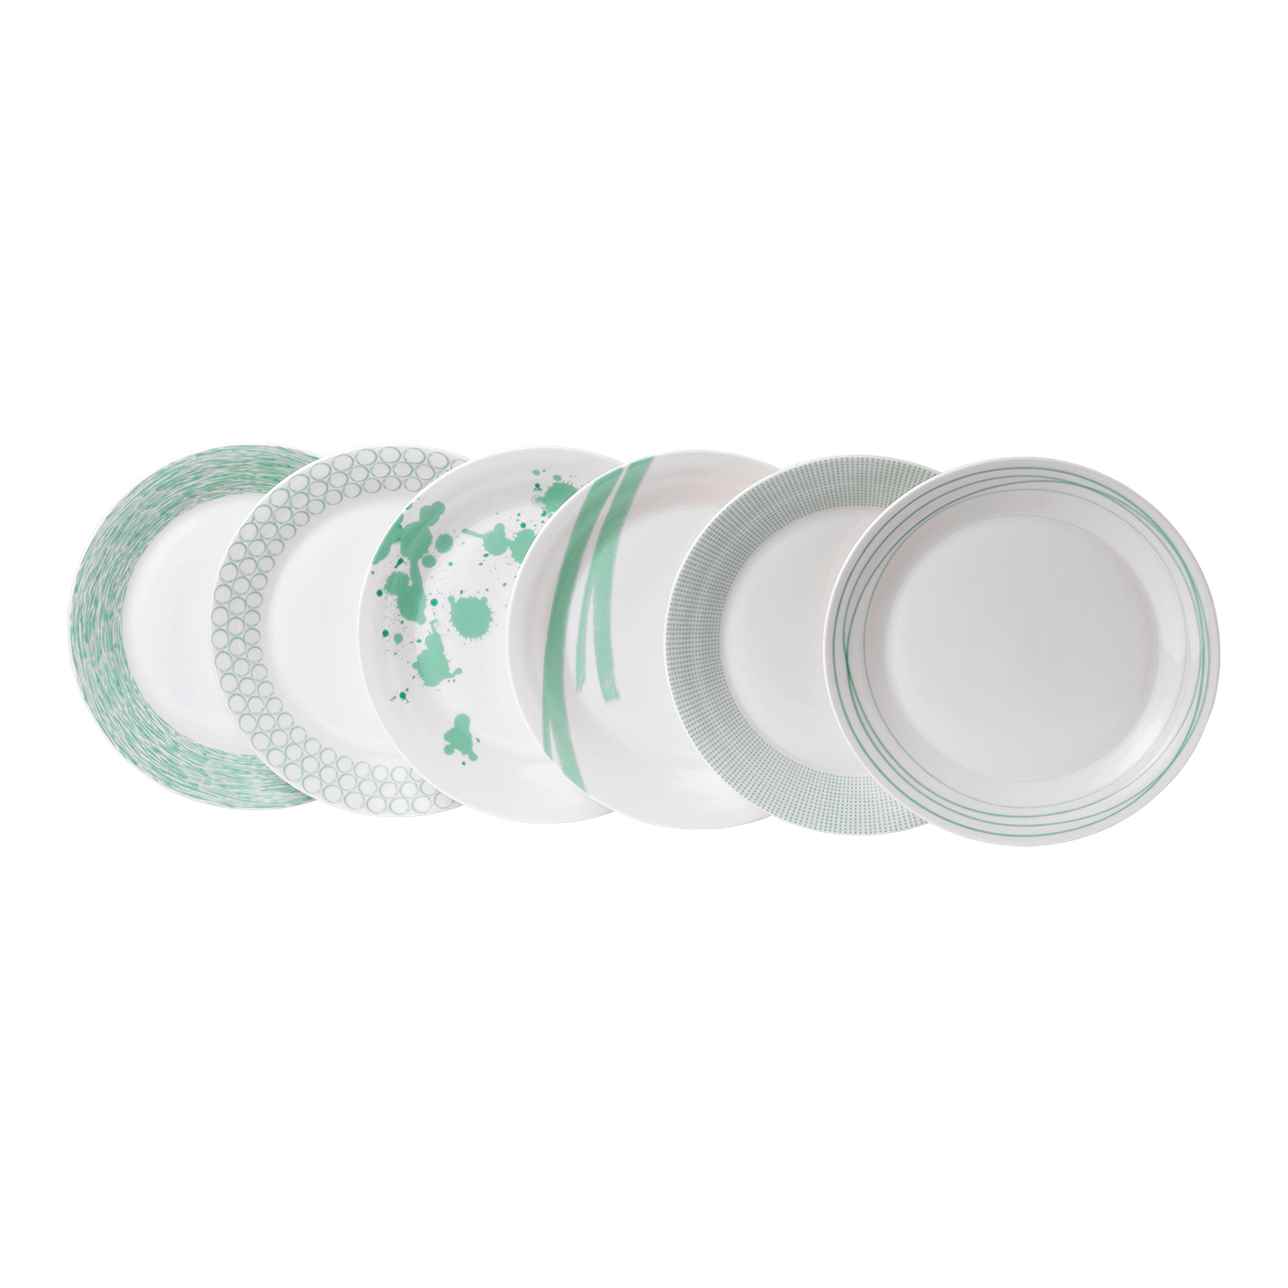 Pacific Mint Dinner Plates (Set of 6)